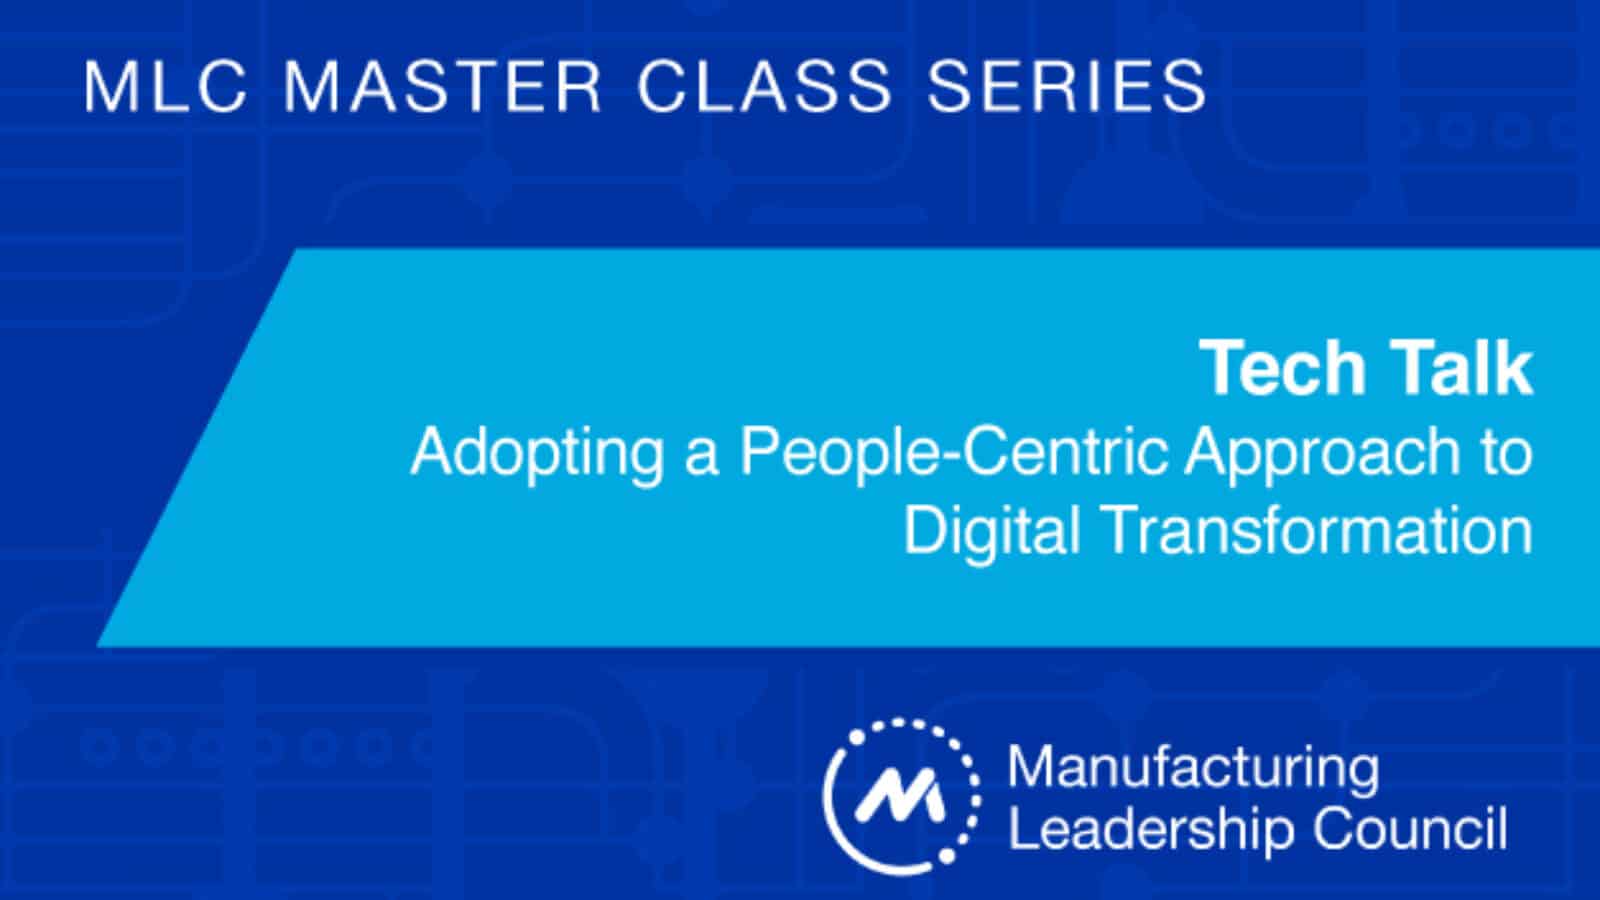 Tech Talk: Adopting a People-Centric Approach to Digital Transformation